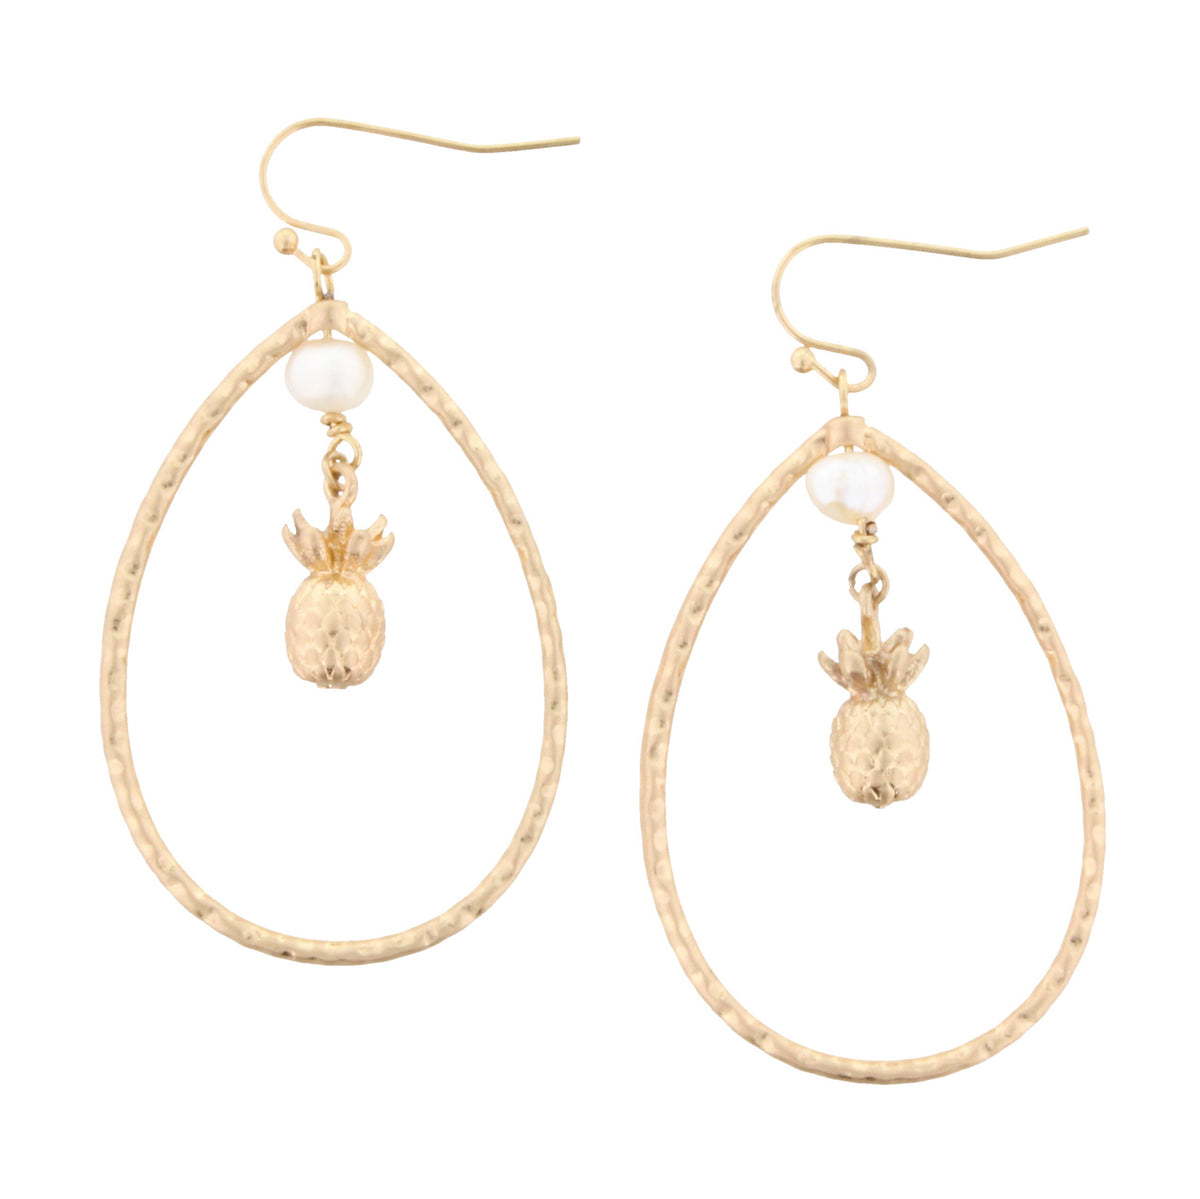 Oval with Pearl & Pineapple Earrings